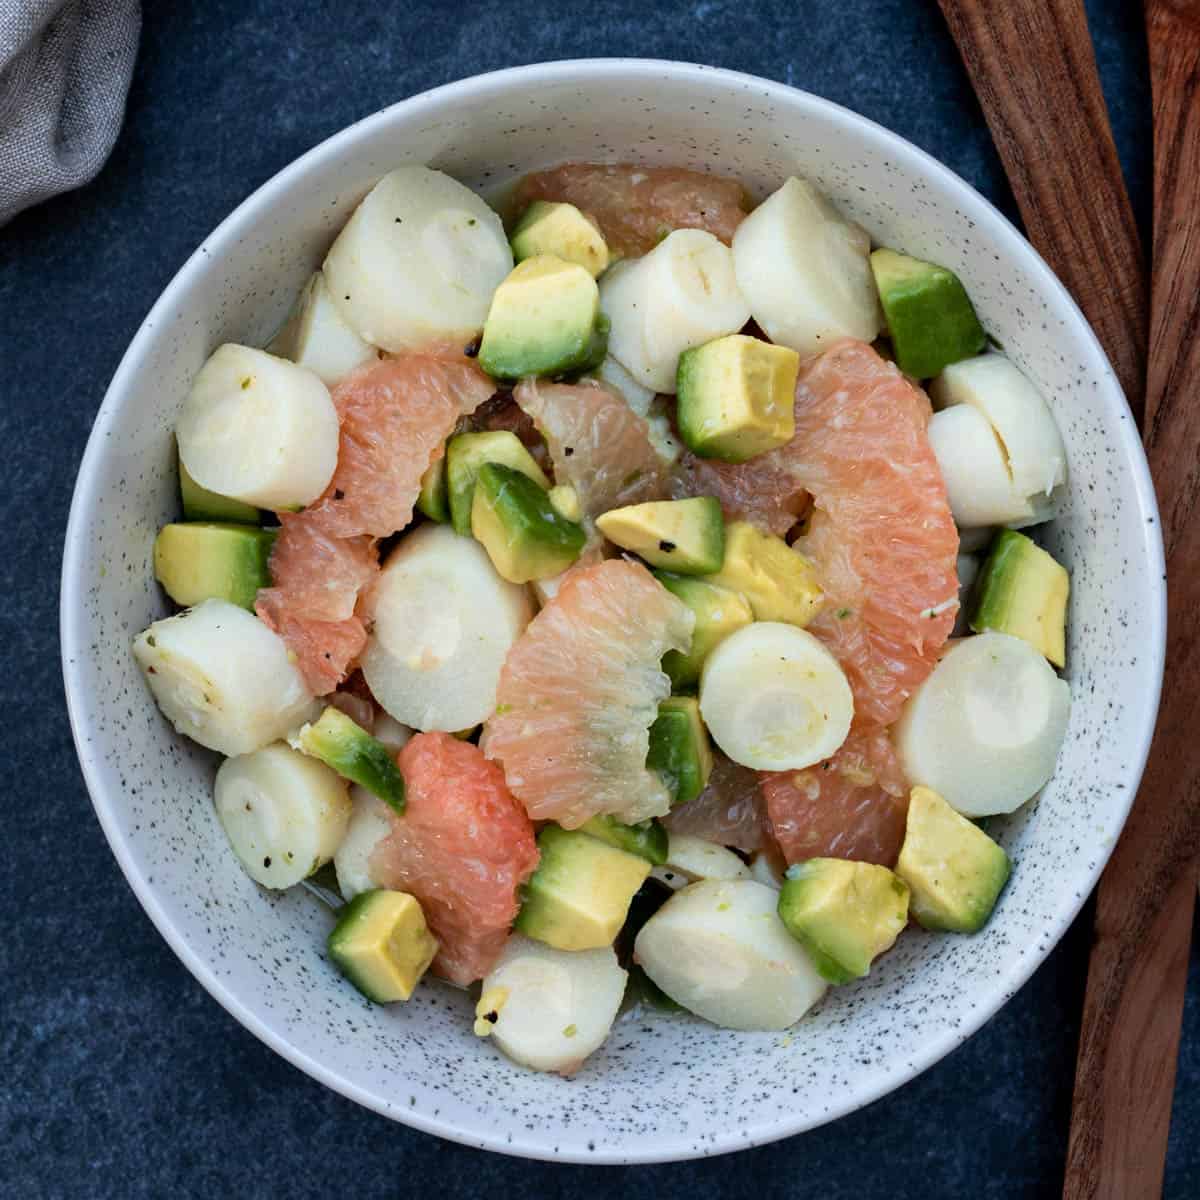 hearts of palm salad with avocado and grapefruit